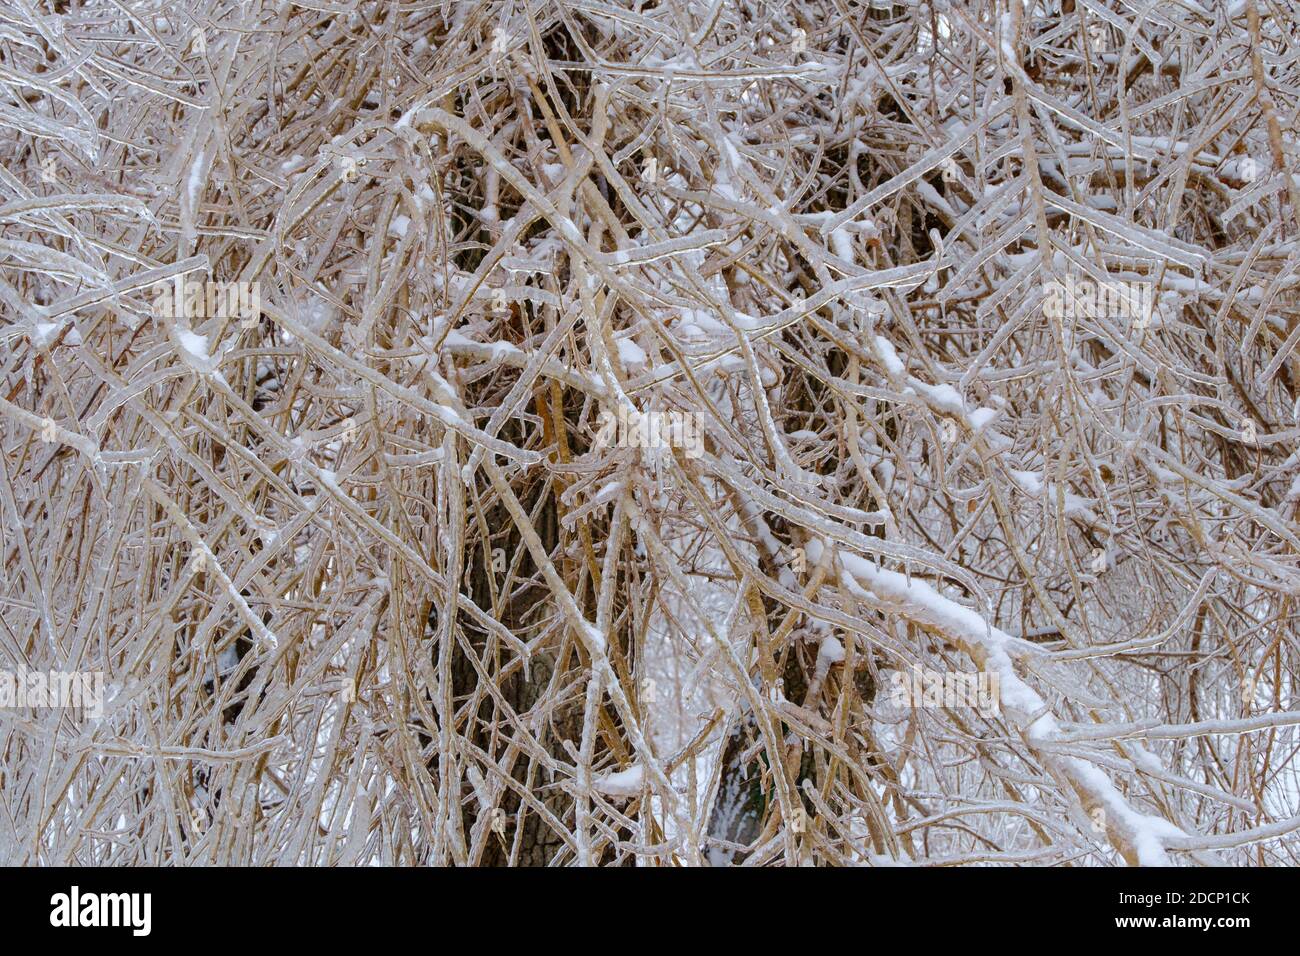 Freezing rain. Icy tree branches after an icy rain. Natural disaster. Selective focus. Stock Photo